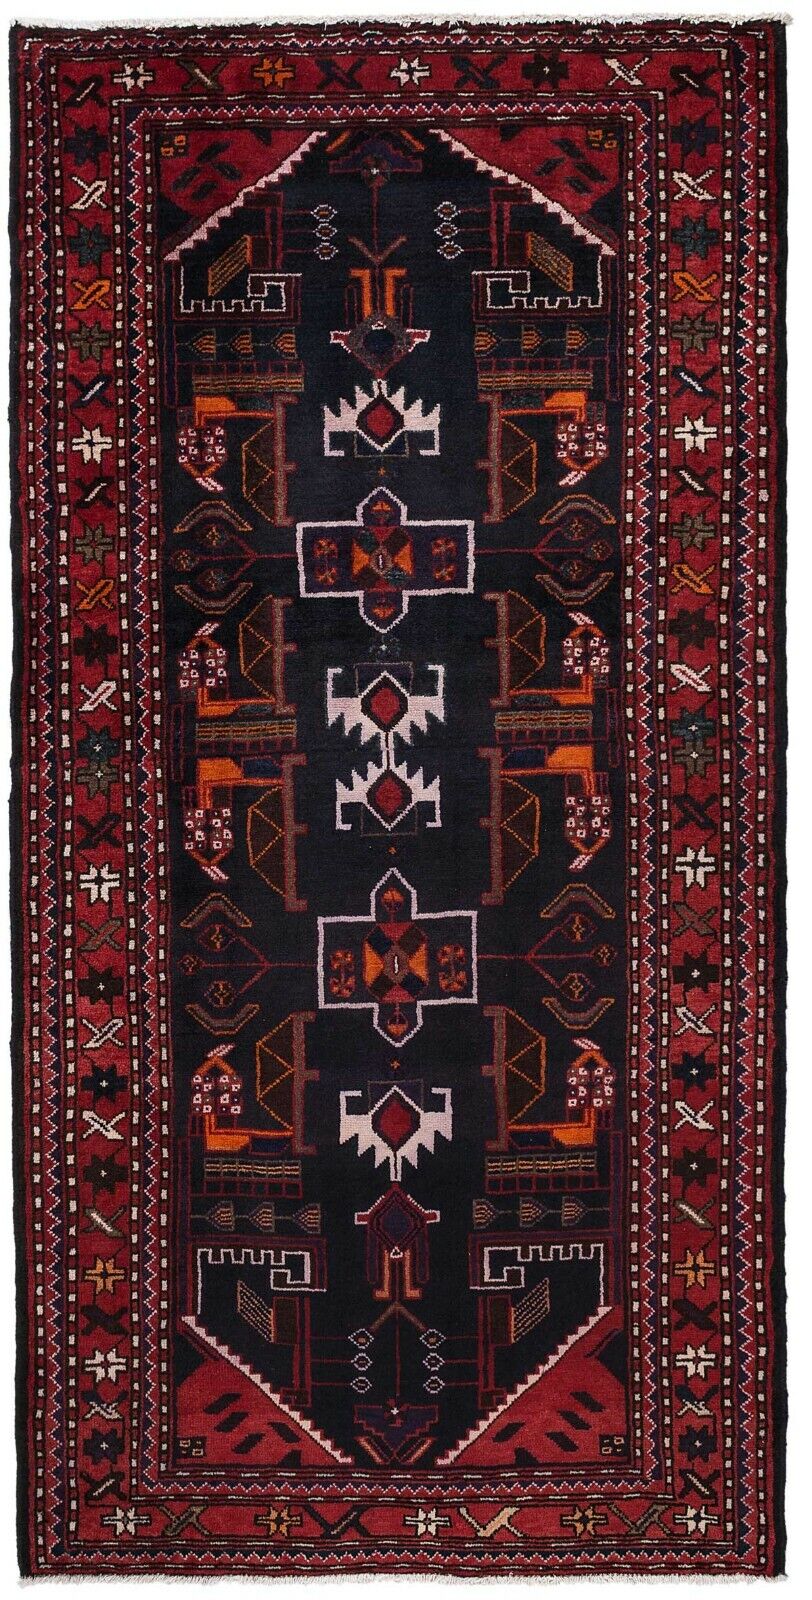 Genuine Handmade Hand Knotted Rug Traditional Carpet 100% Wool Pile 240x120cm